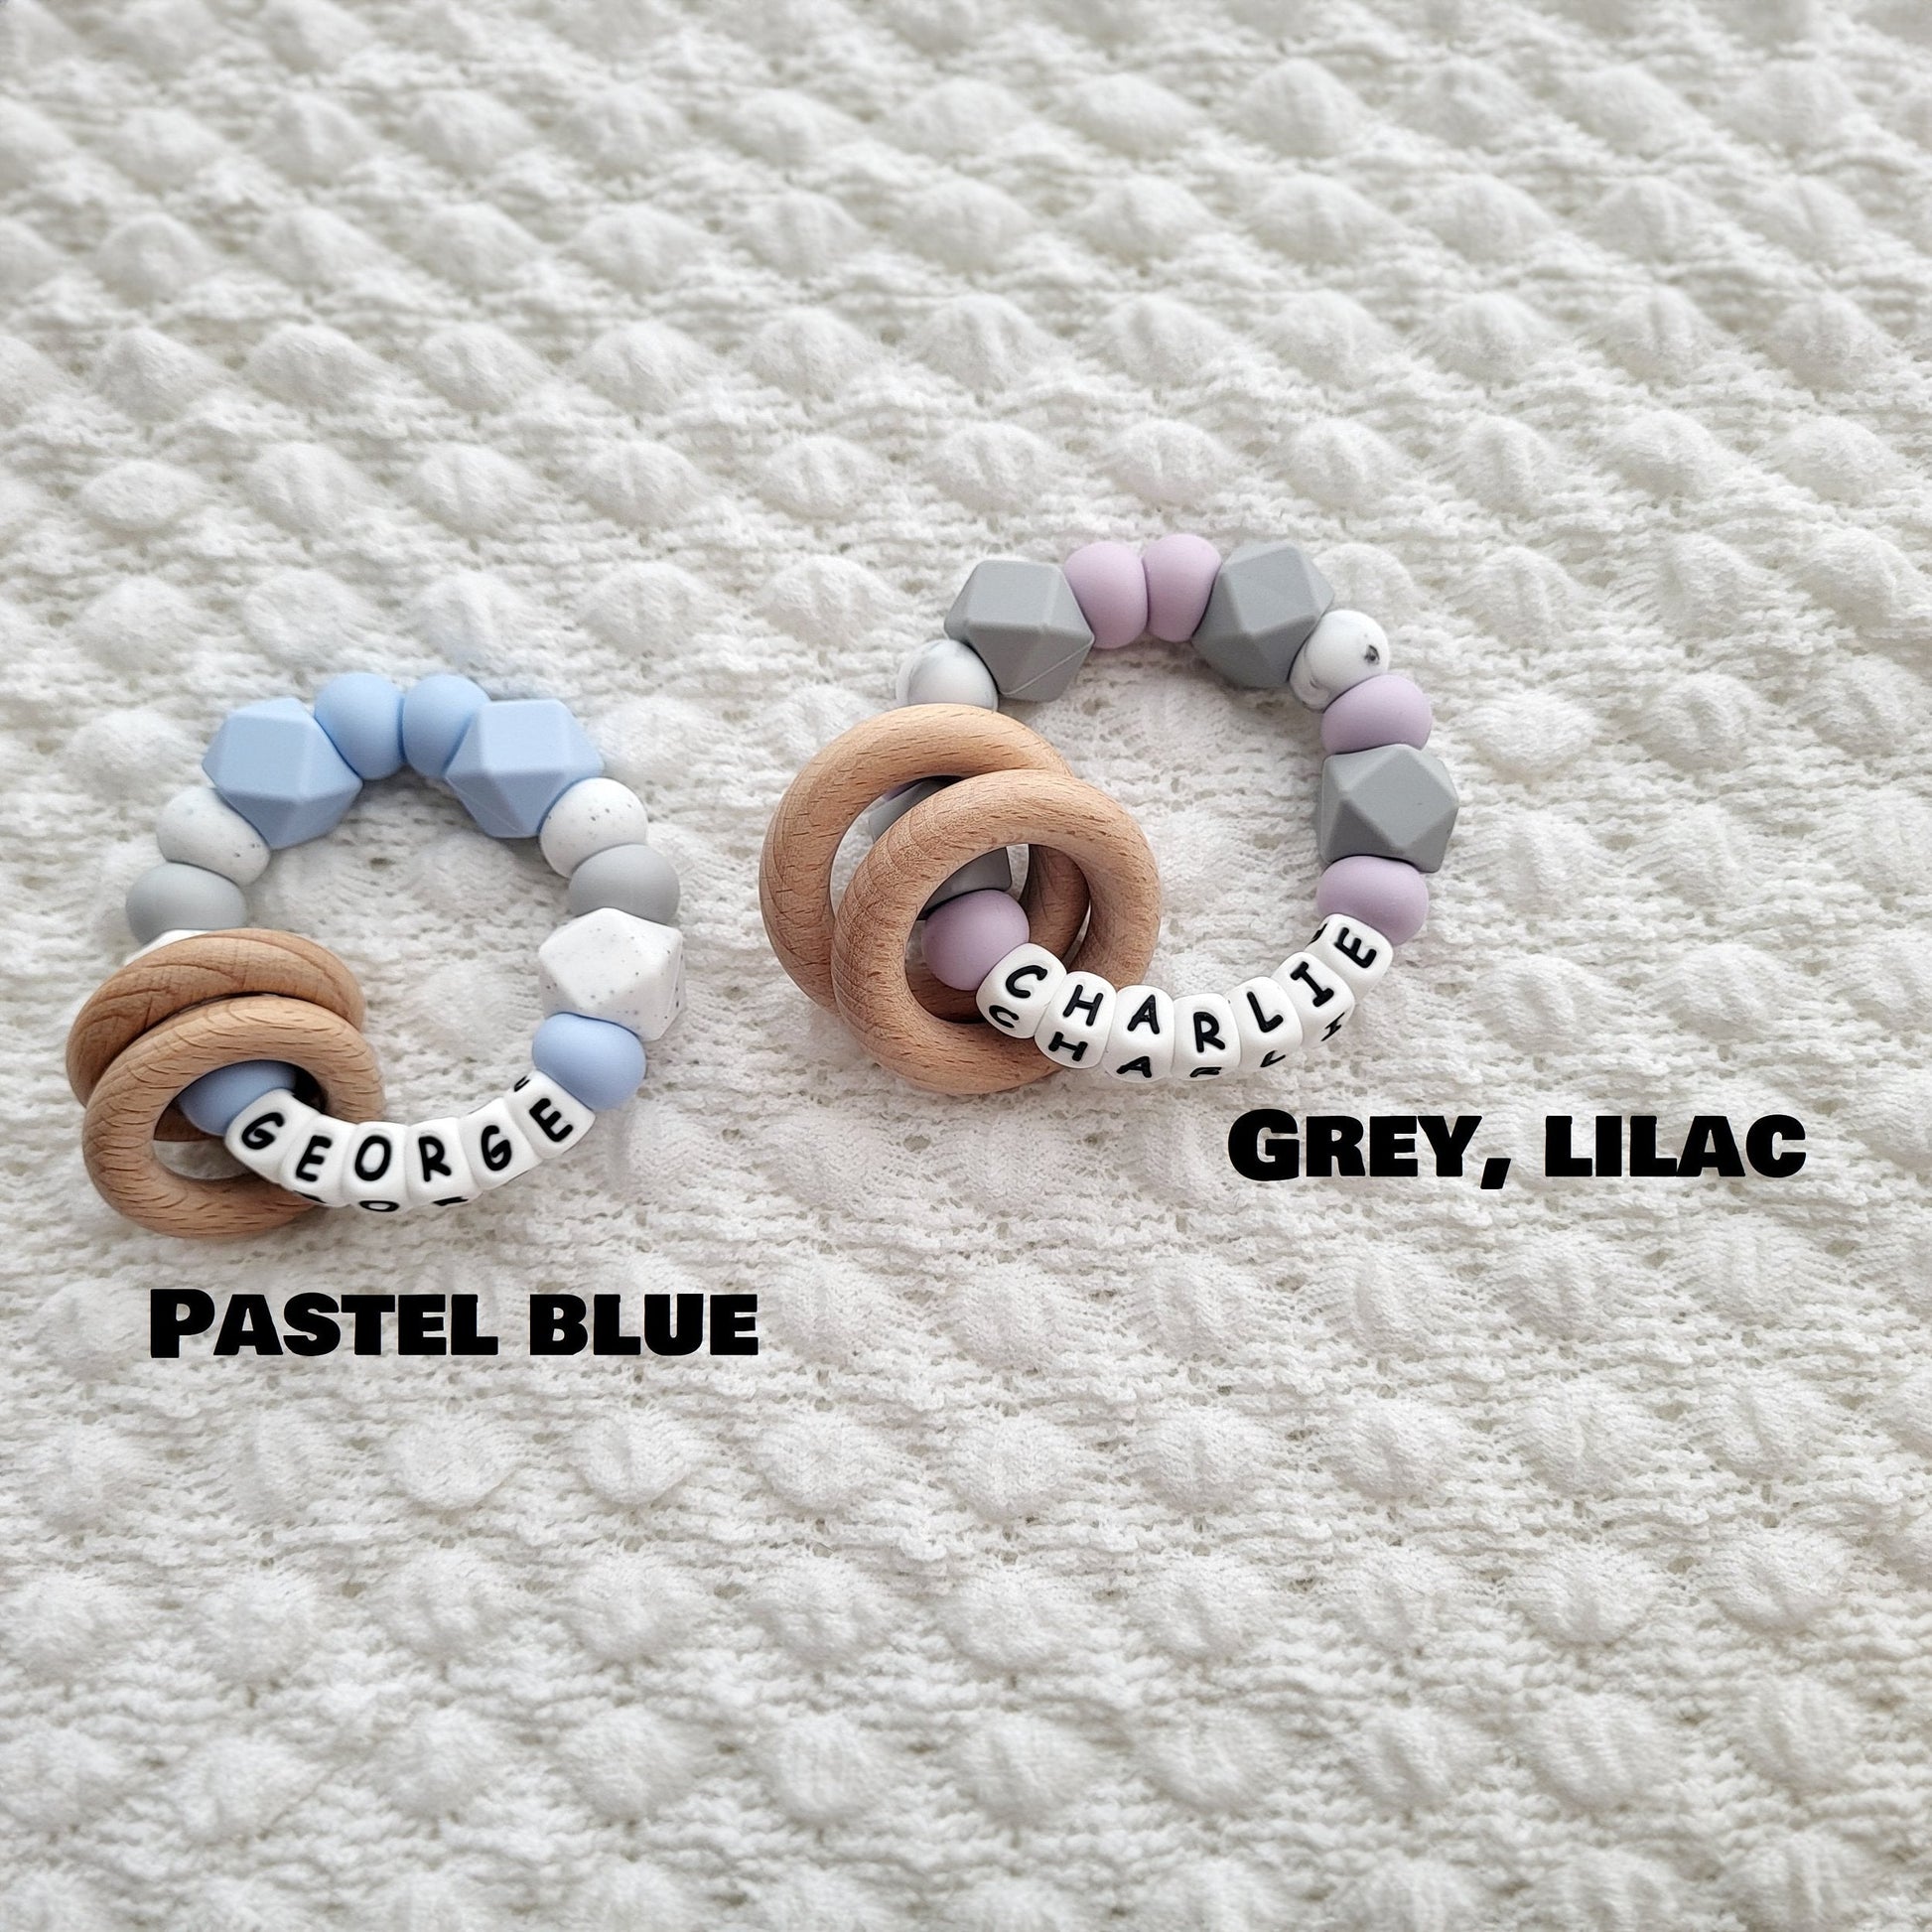 personalized-fiddle-toy-newborn-baby-gifts-blue-grey